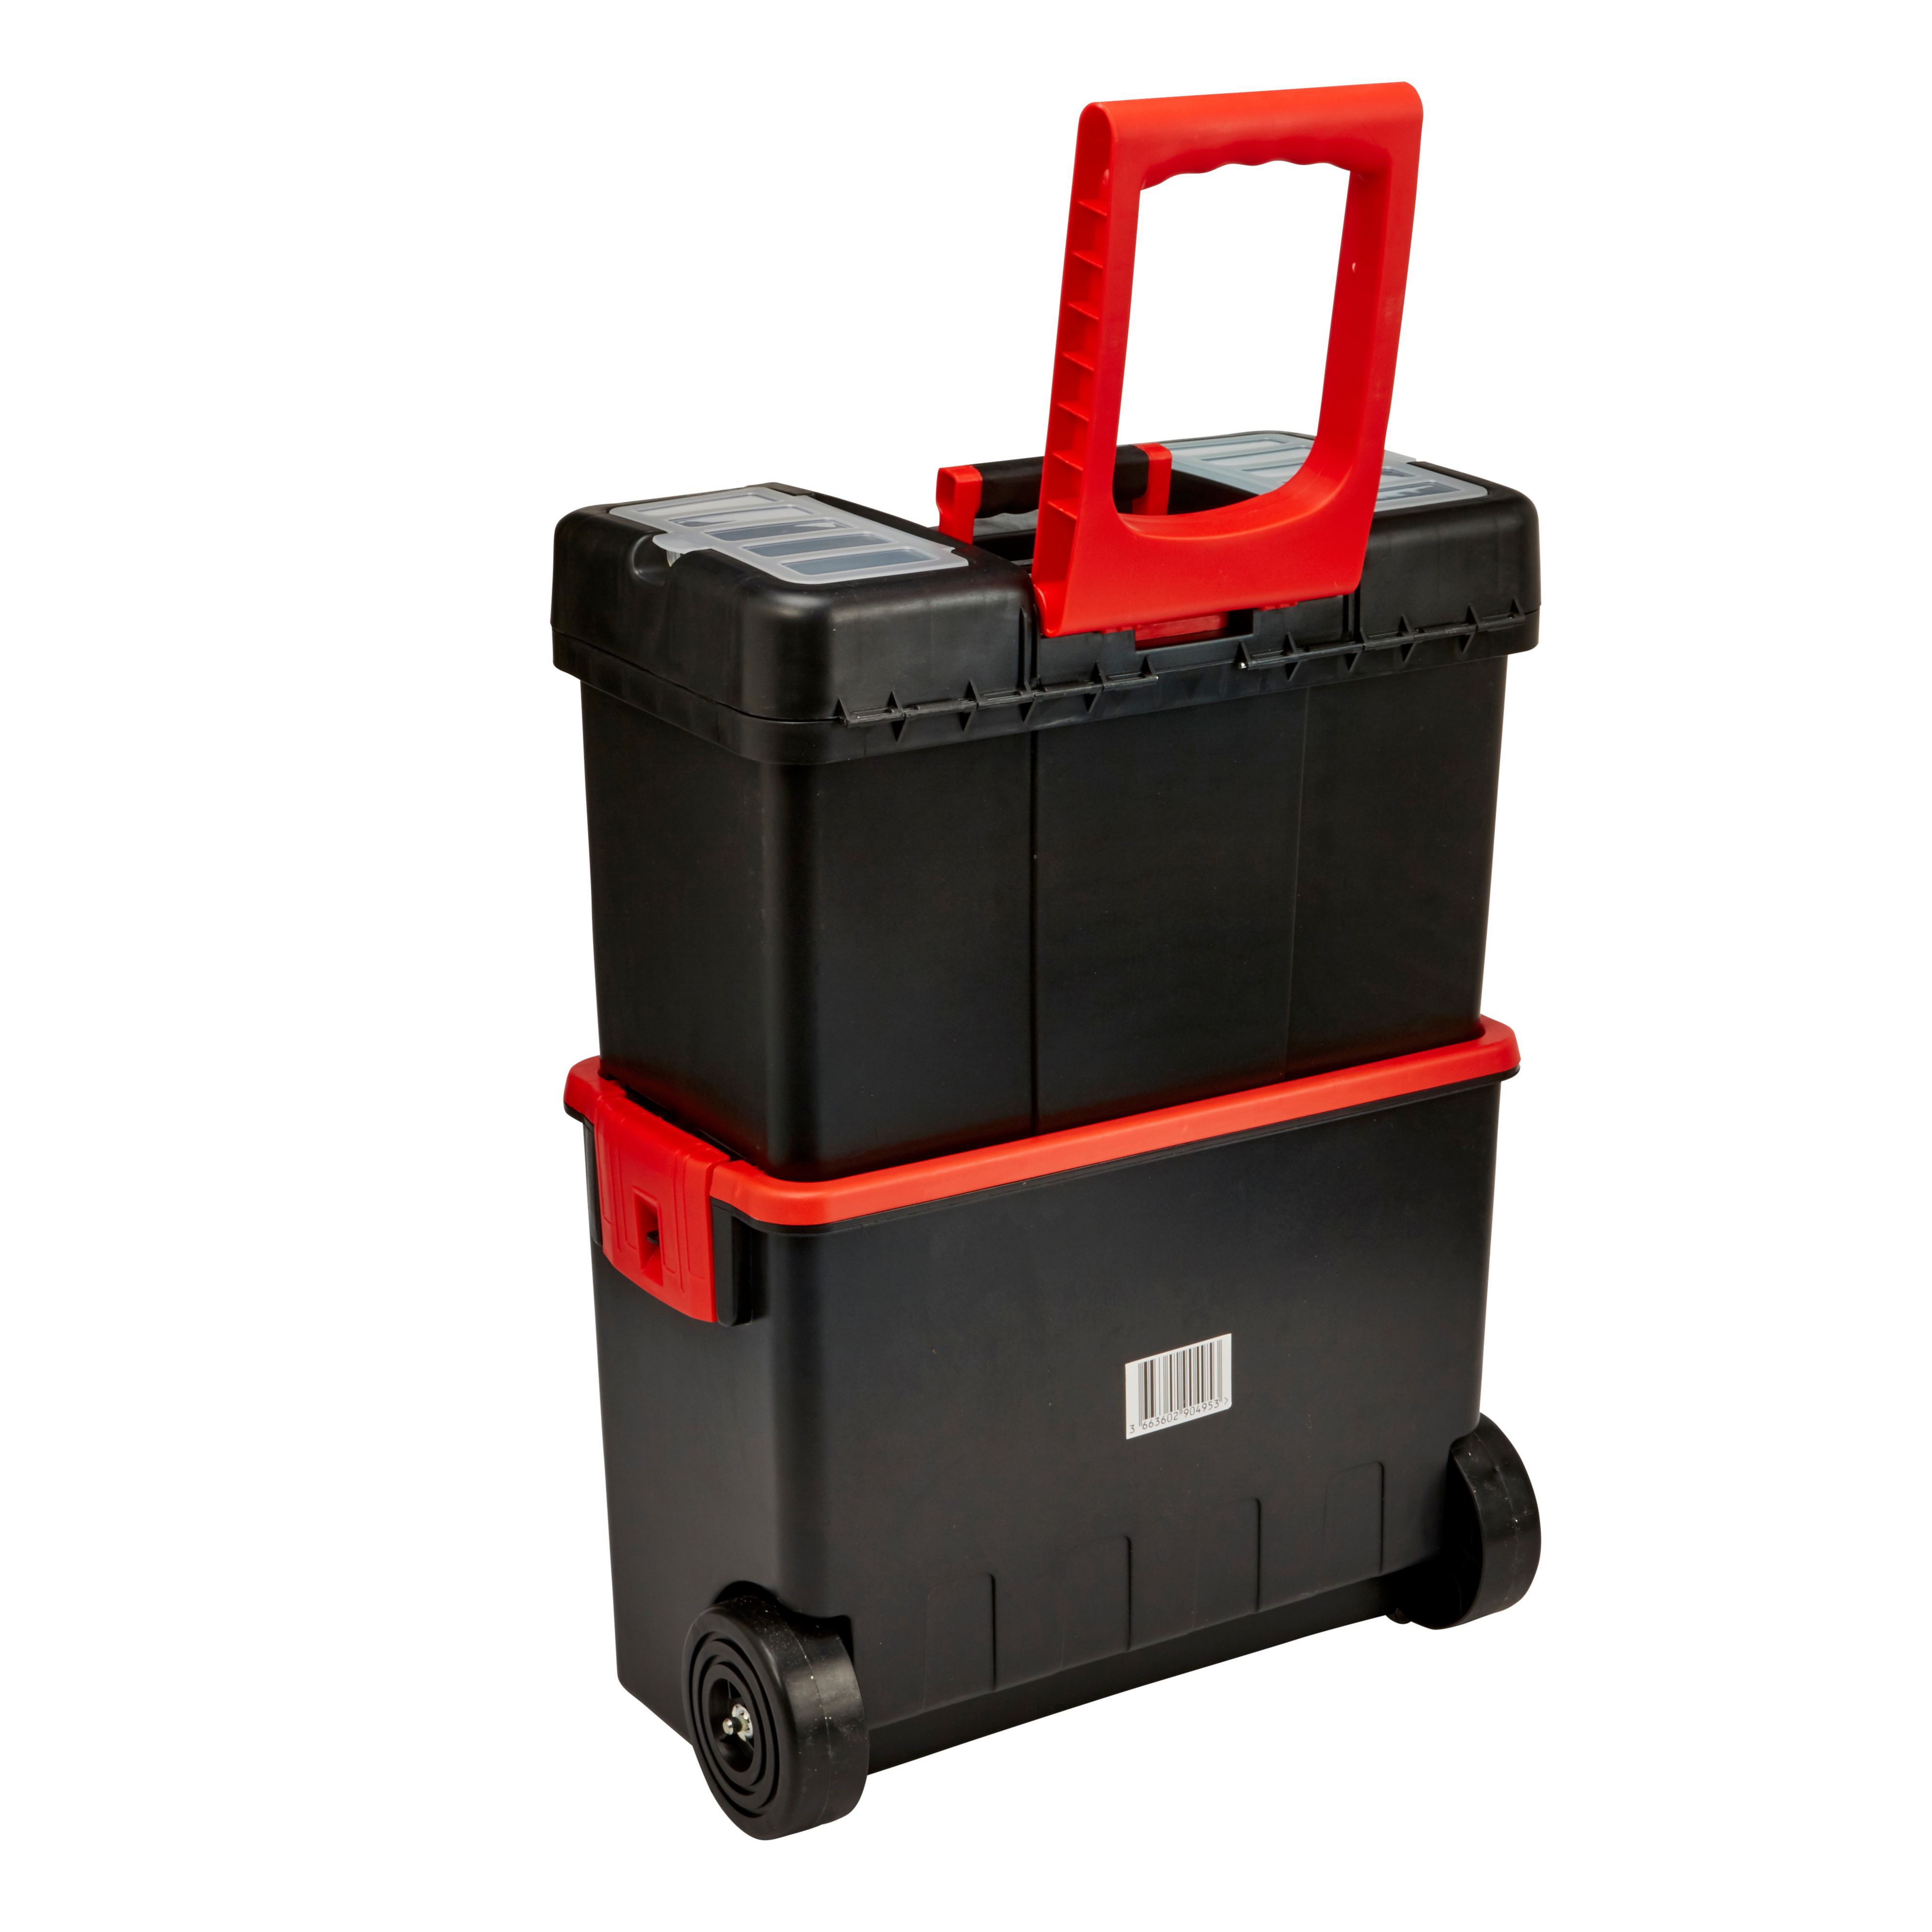 Polypropylene (PP) 2 compartment Trolley & toolbox (H)620mm (W)255mm (D)460mm